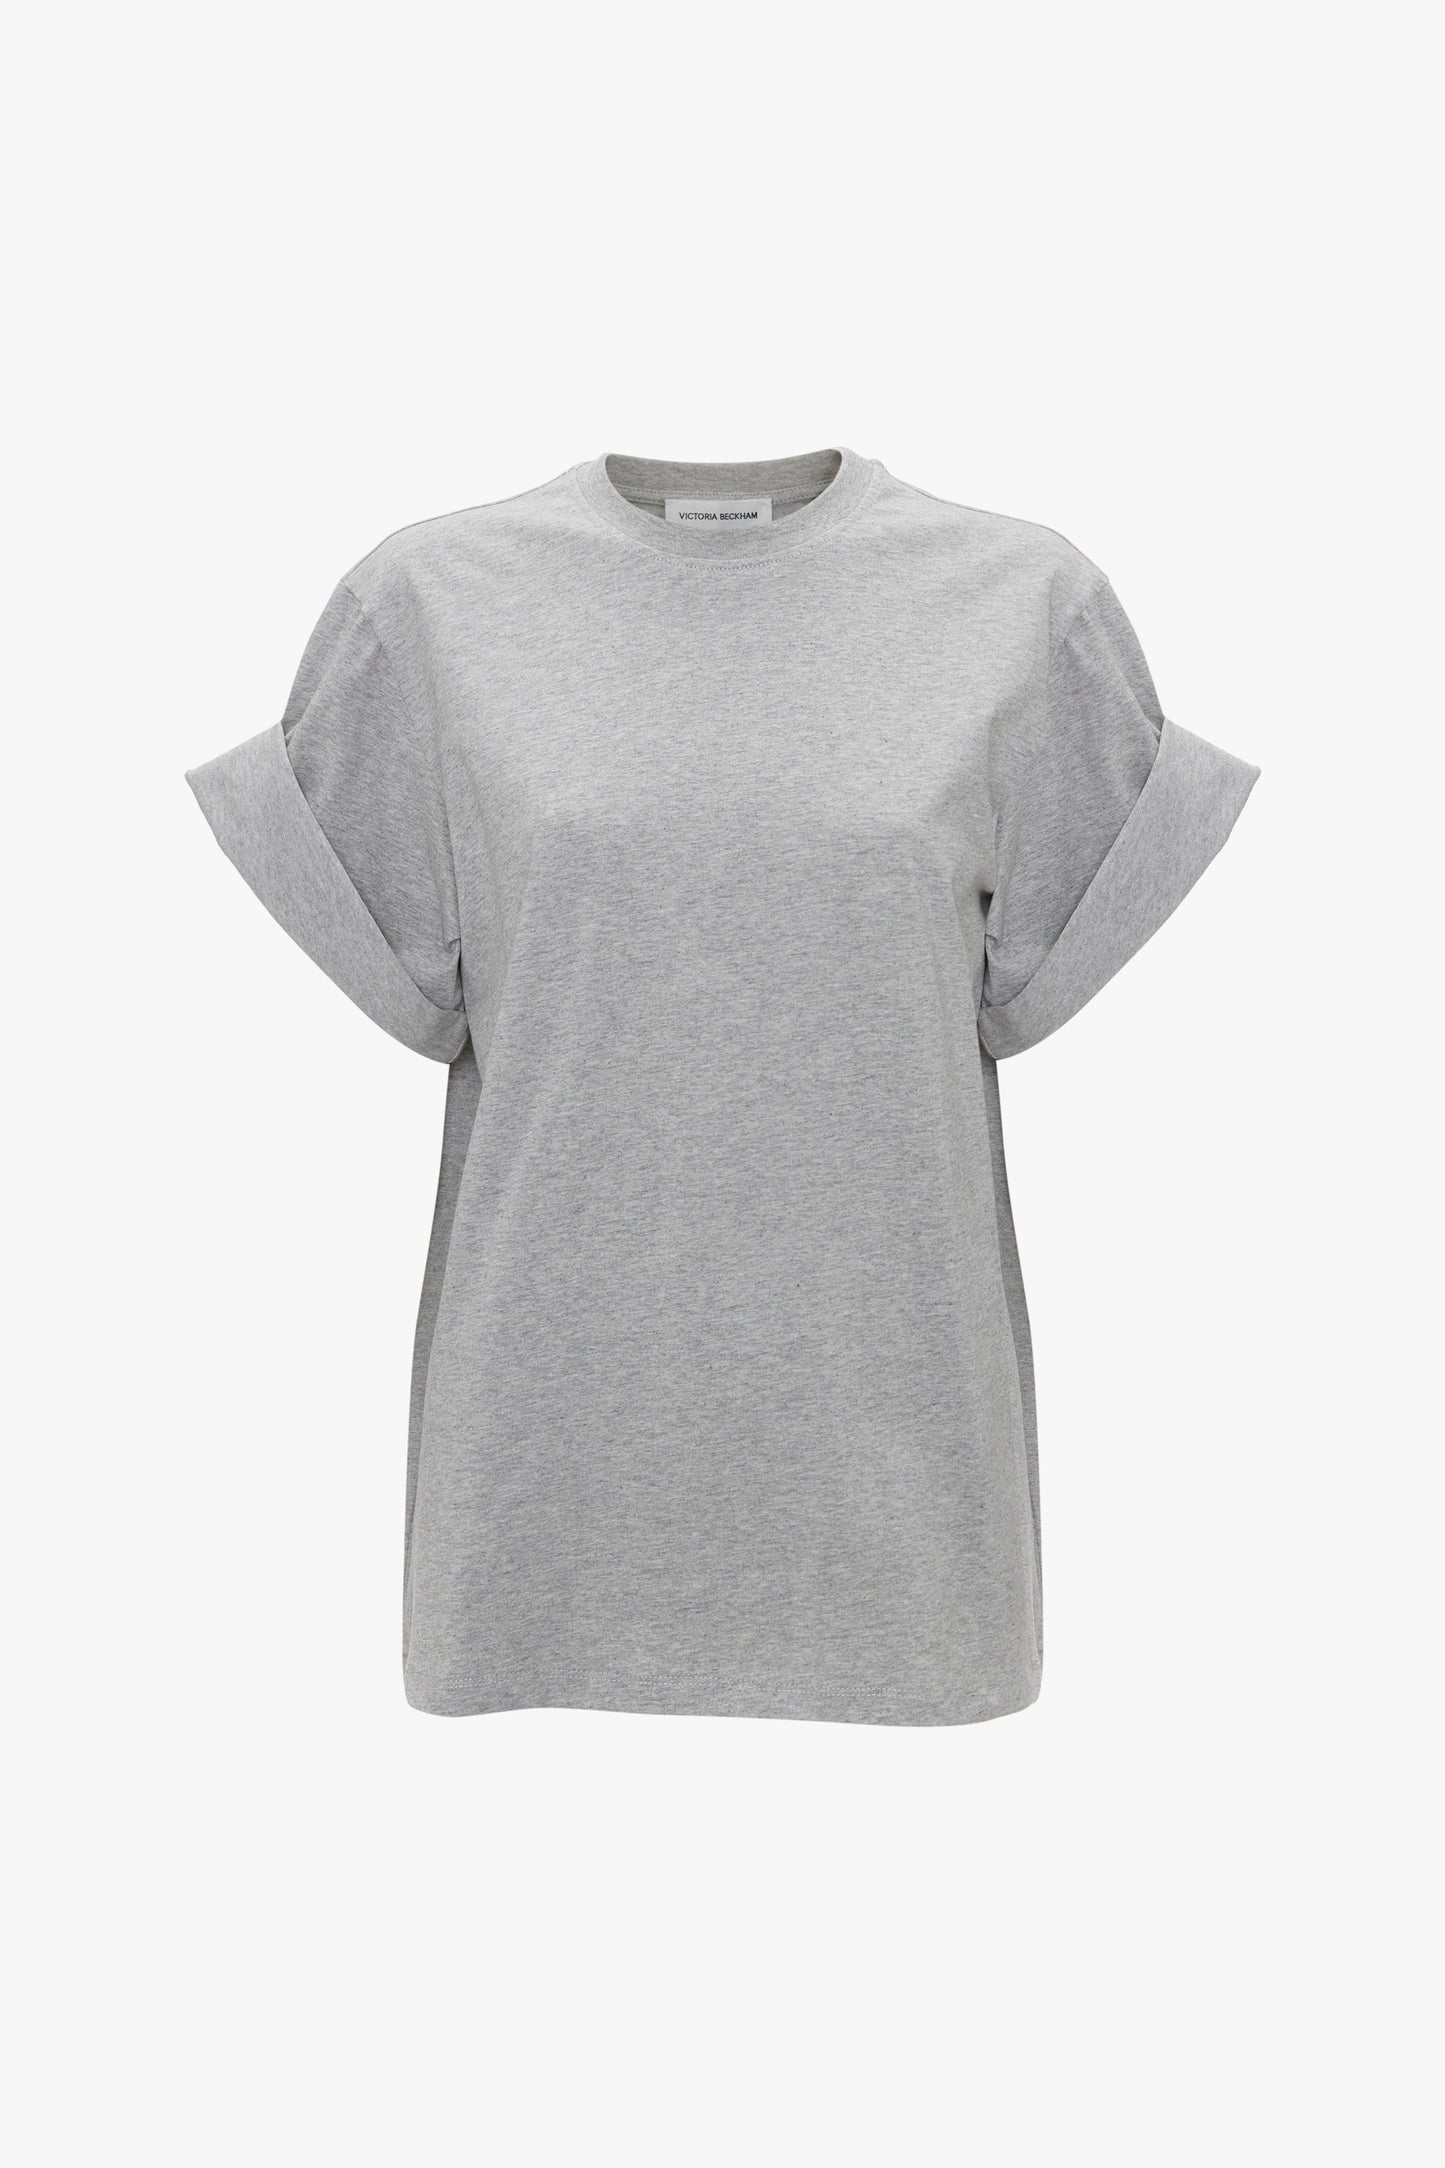 Asymmetric Relaxed Fit T-Shirt in Grey Marl by Victoria Beckham with short sleeves, displayed on a white background.